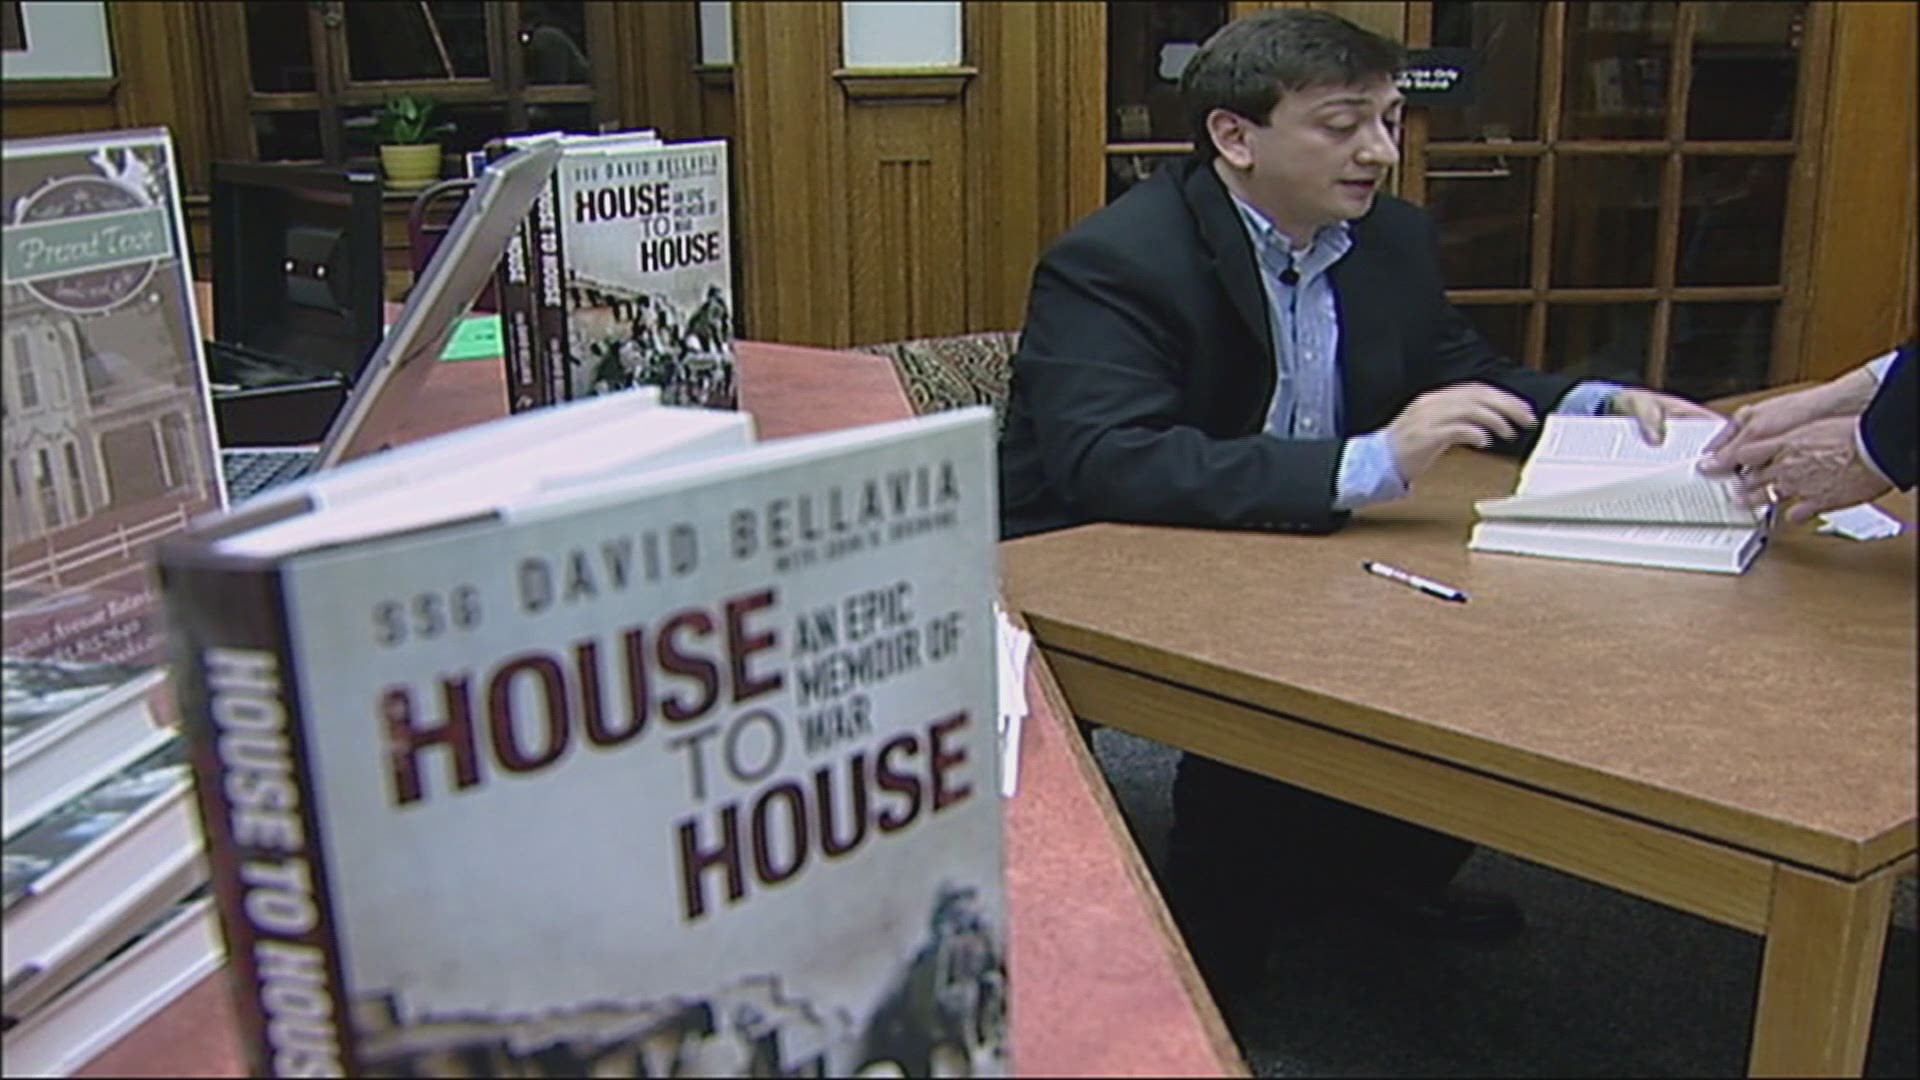 In 2007, David Bellavia talked with 2 On Your Side's Rich Kellman after the release of his book, 'House to House'